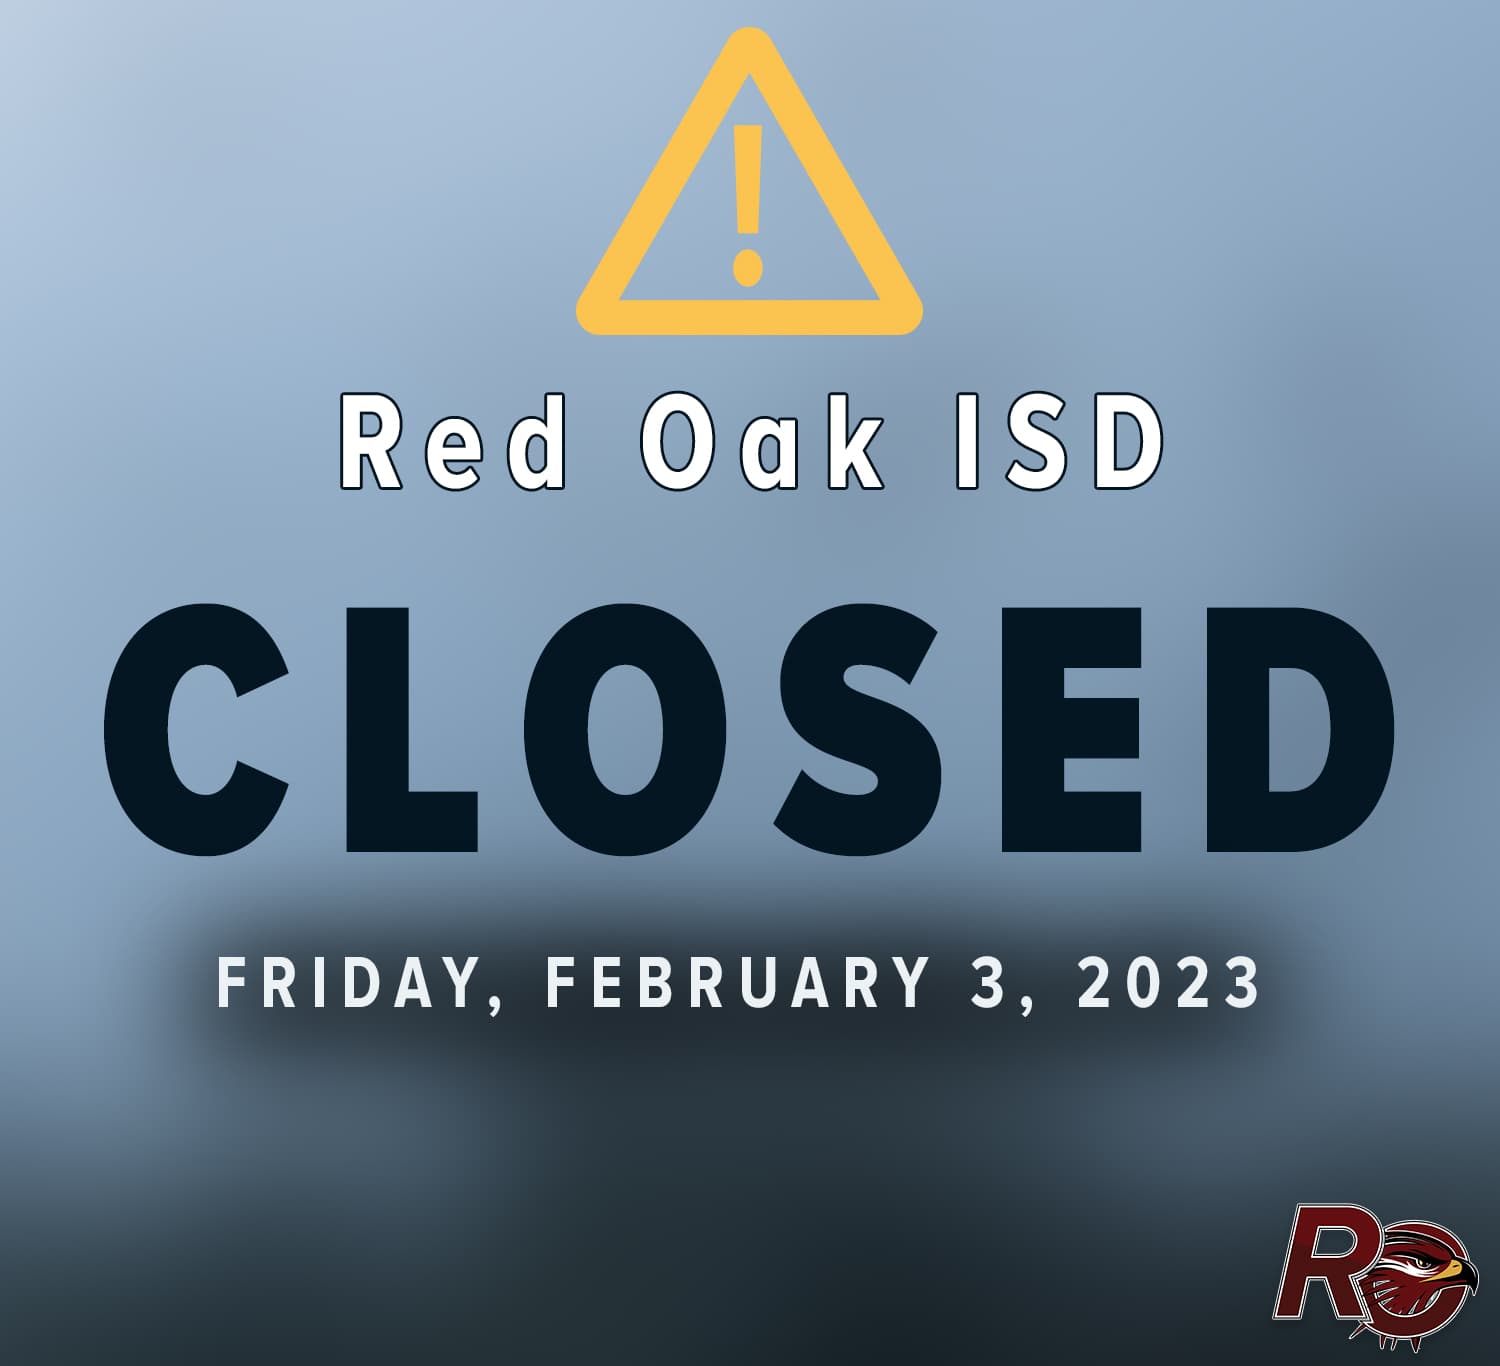 Red Oak ISD closed Friday